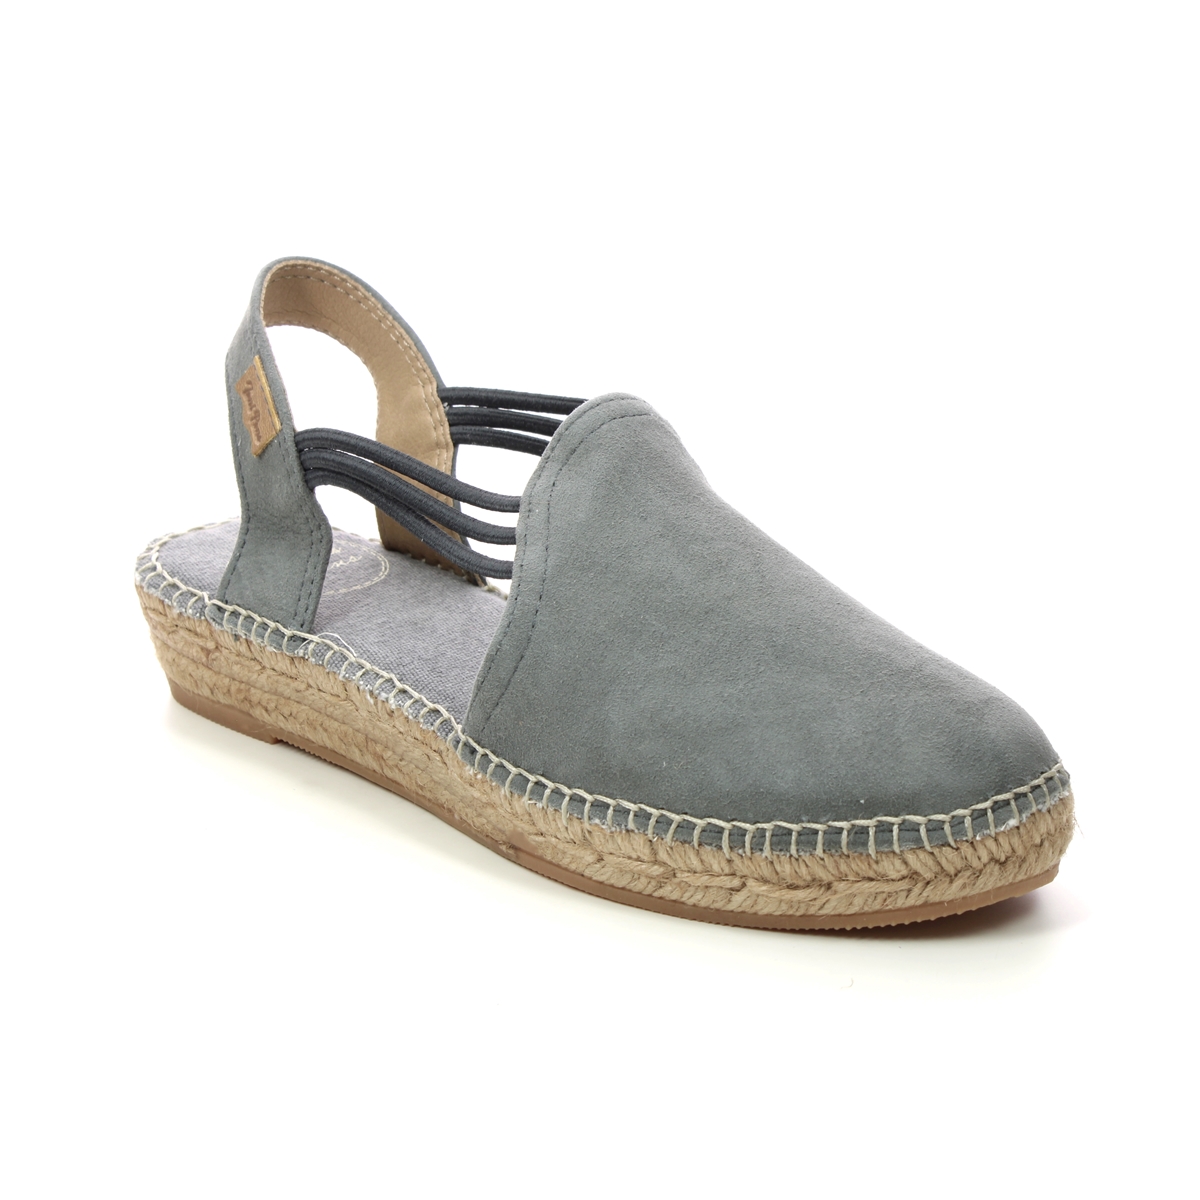 Toni Pons Nuria In Grey Suede 0110-03 In Size 36 In Plain Grey Suede